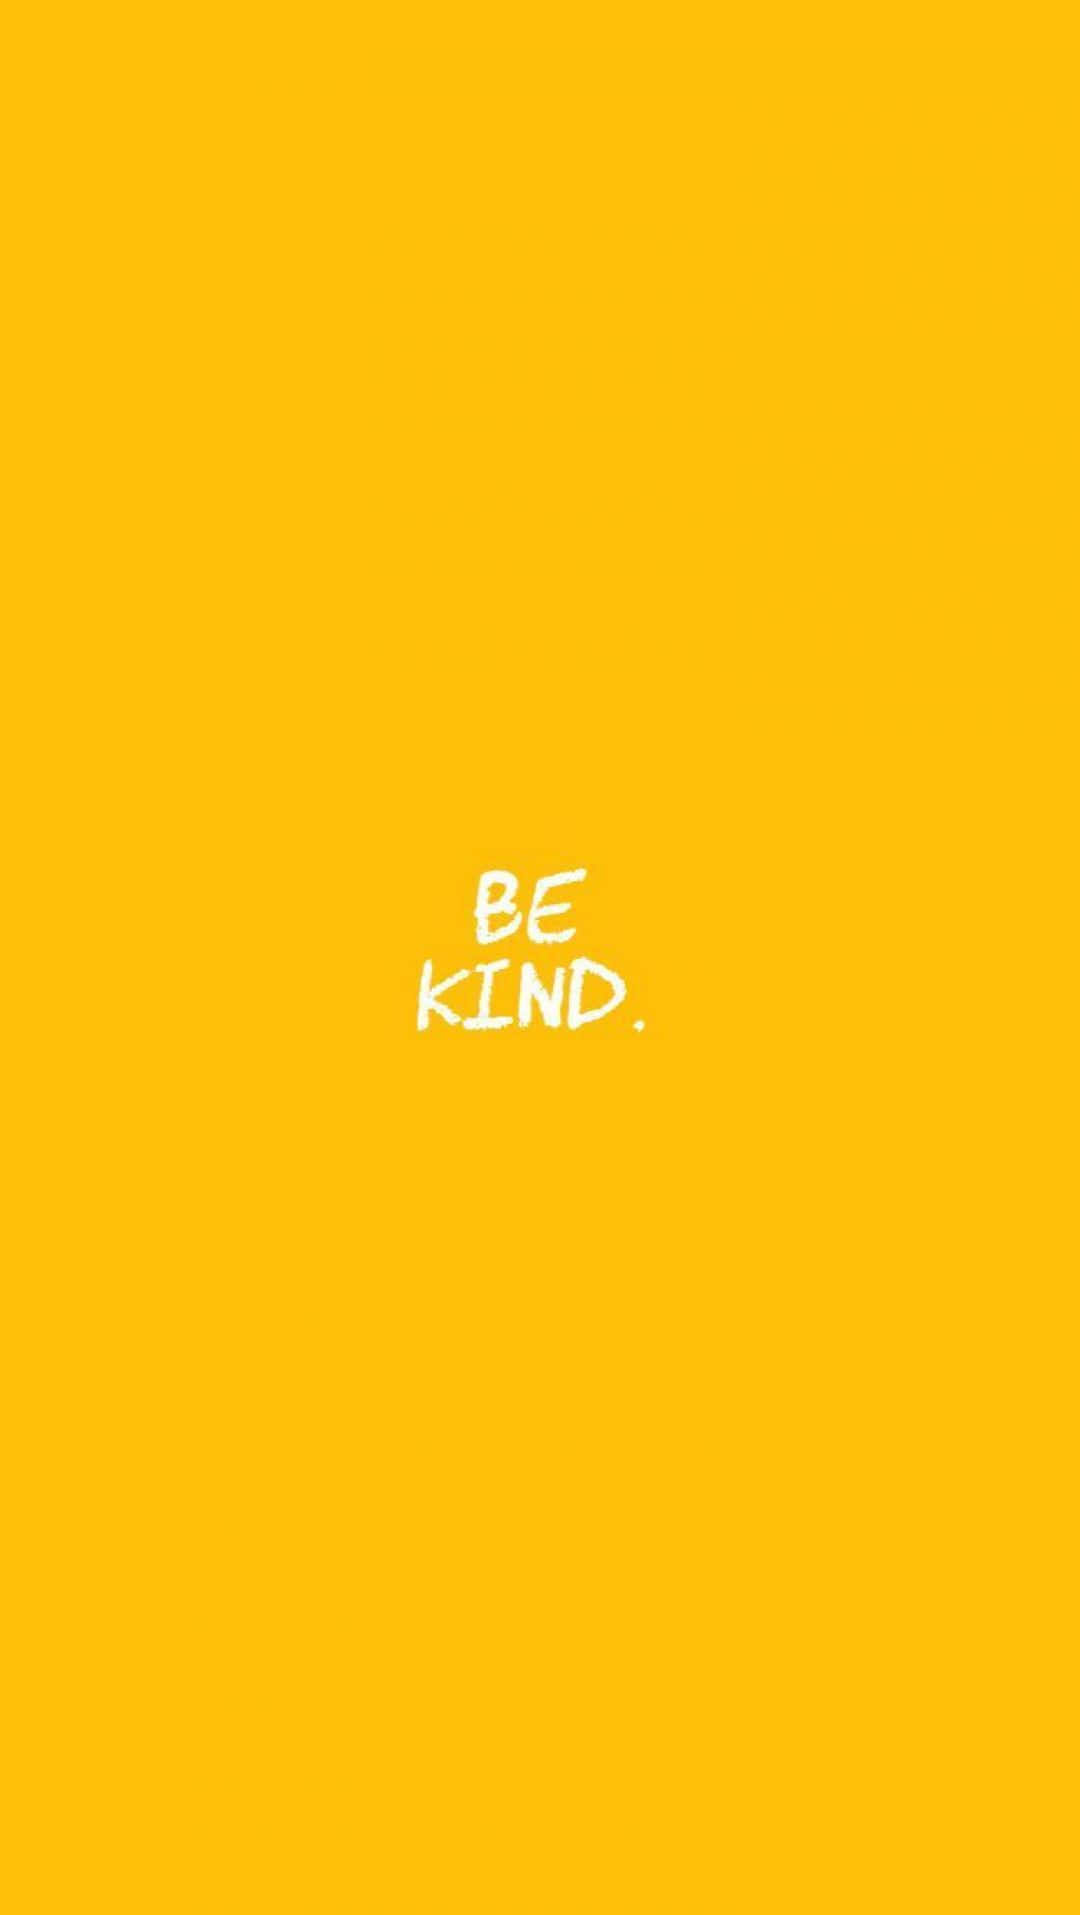 Be Kind In Yellow Background Wallpaper